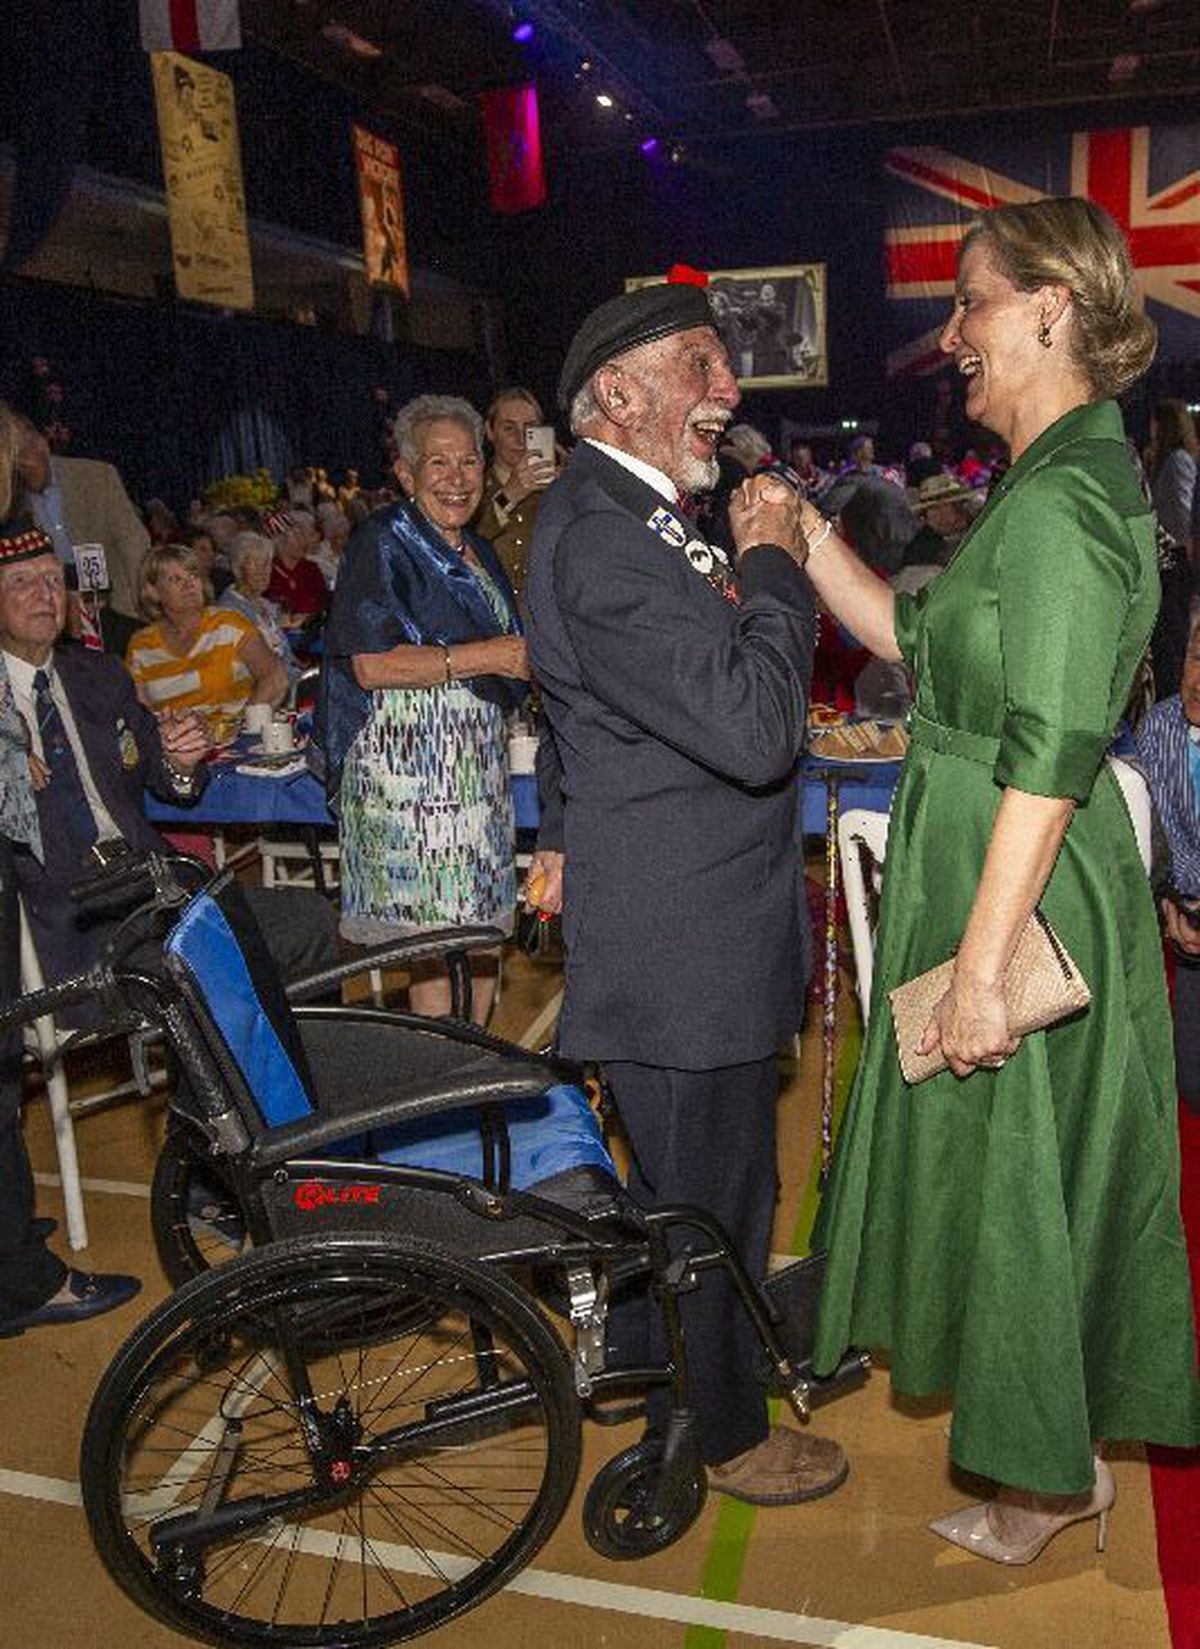 D-day veteran Alberto Joseph Cattini is delighted to meet the Countess of Wessex at yesterday’s Liberation Tea Dance. (Picture by Sophie Rabey, 30800099)